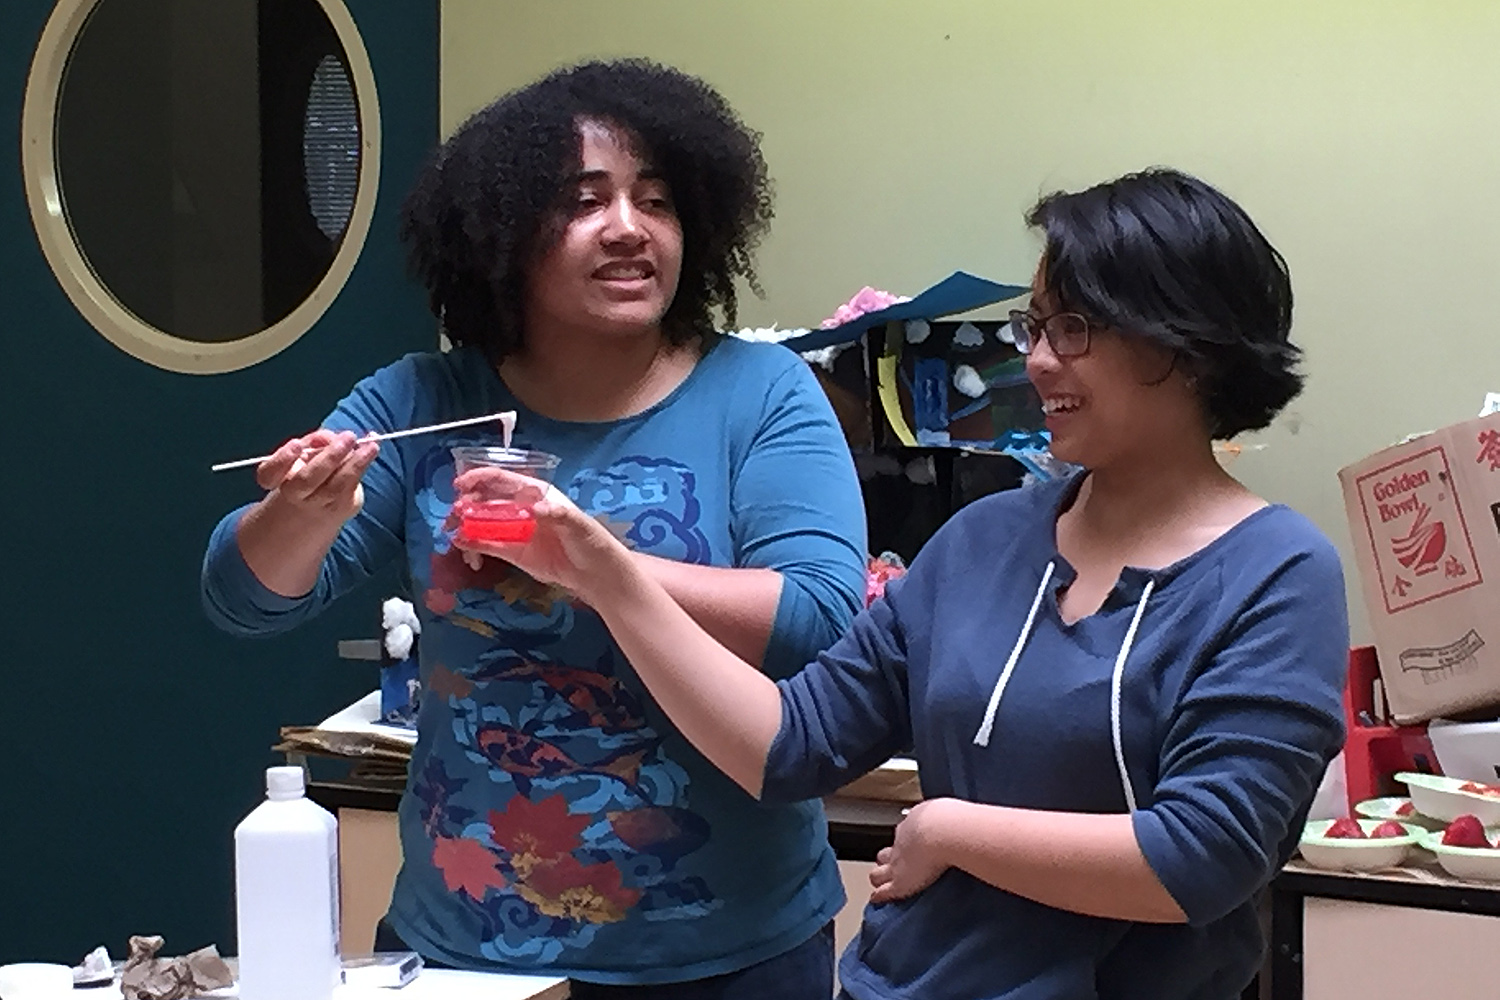 At Green Street, biology major Taylor Matthew ’17 and East Asian studies major Erin Deleon ’17 and led a hands-on science activity for GSTLC’s Discovery AfterSchool students.